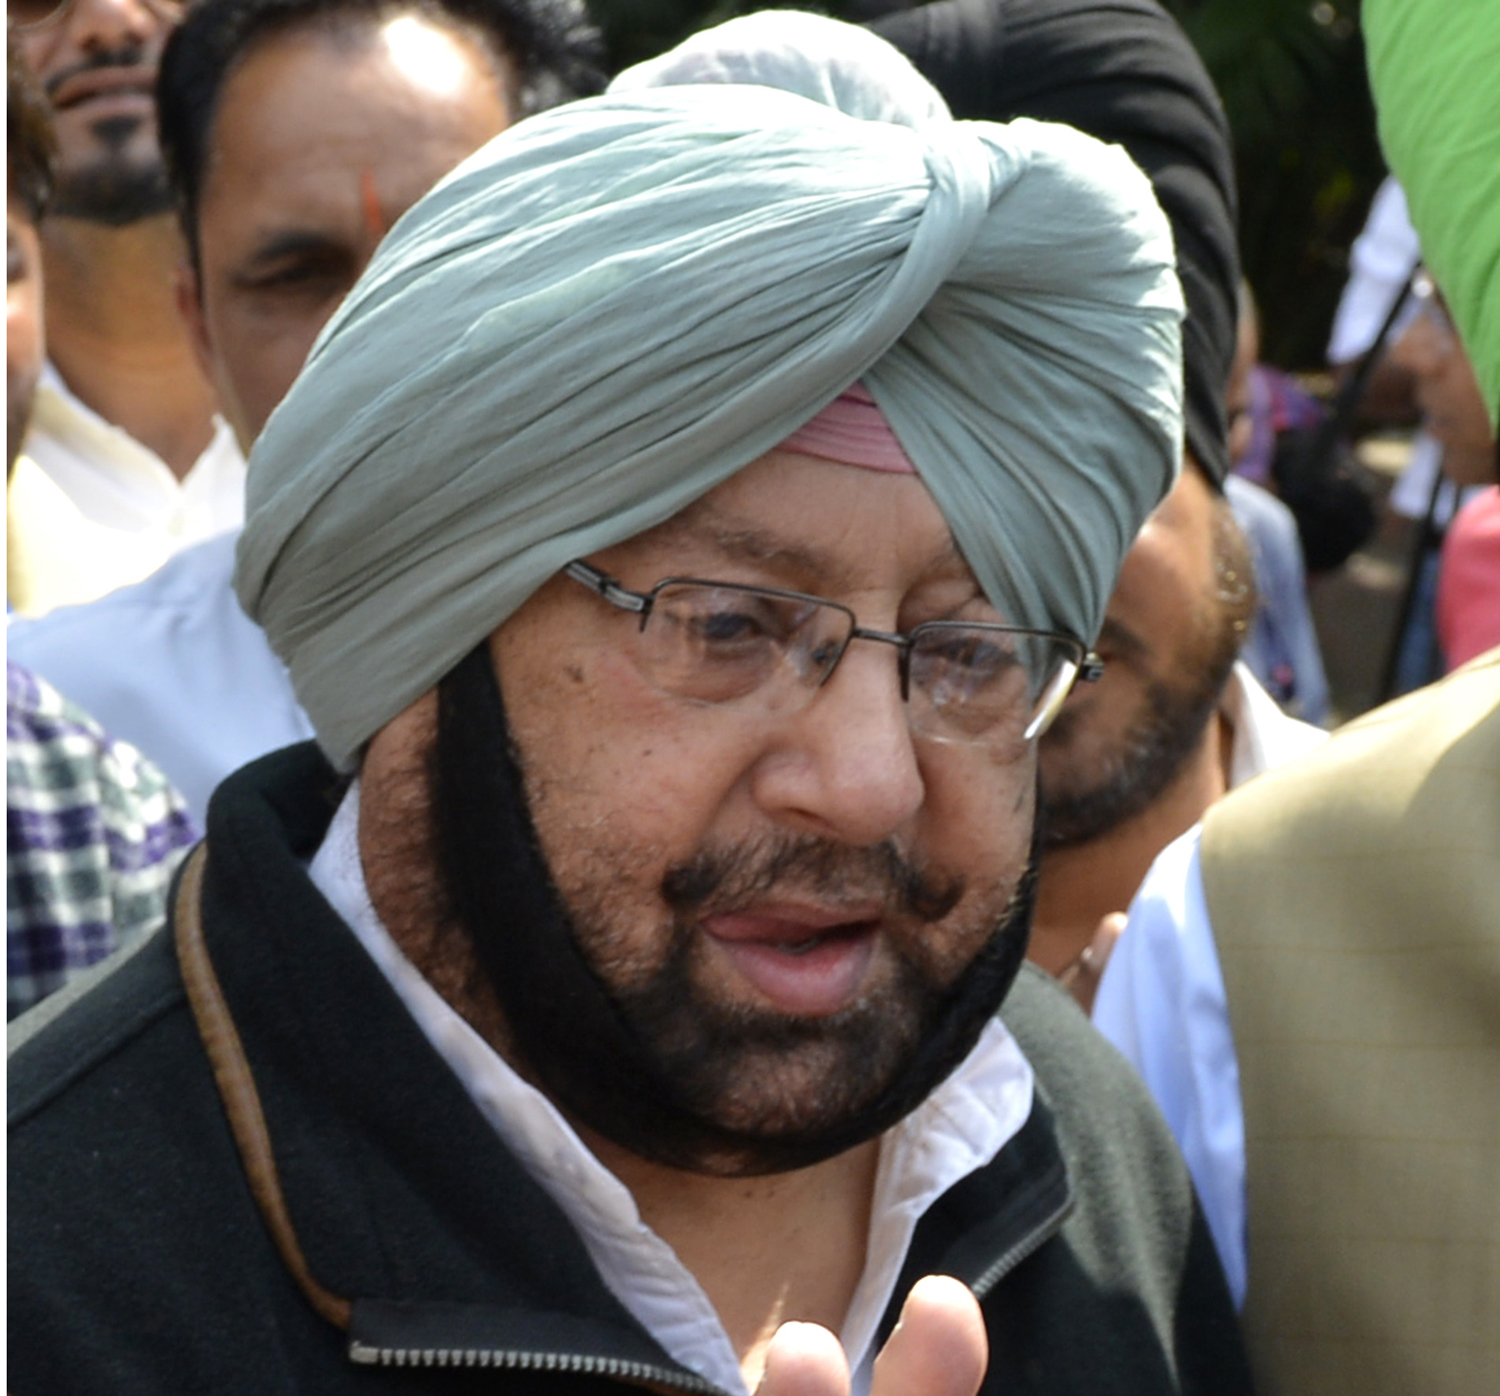 Amarinder announced a compensation of Rs 5 lakh for the kin of those killed and free treatment for the injured